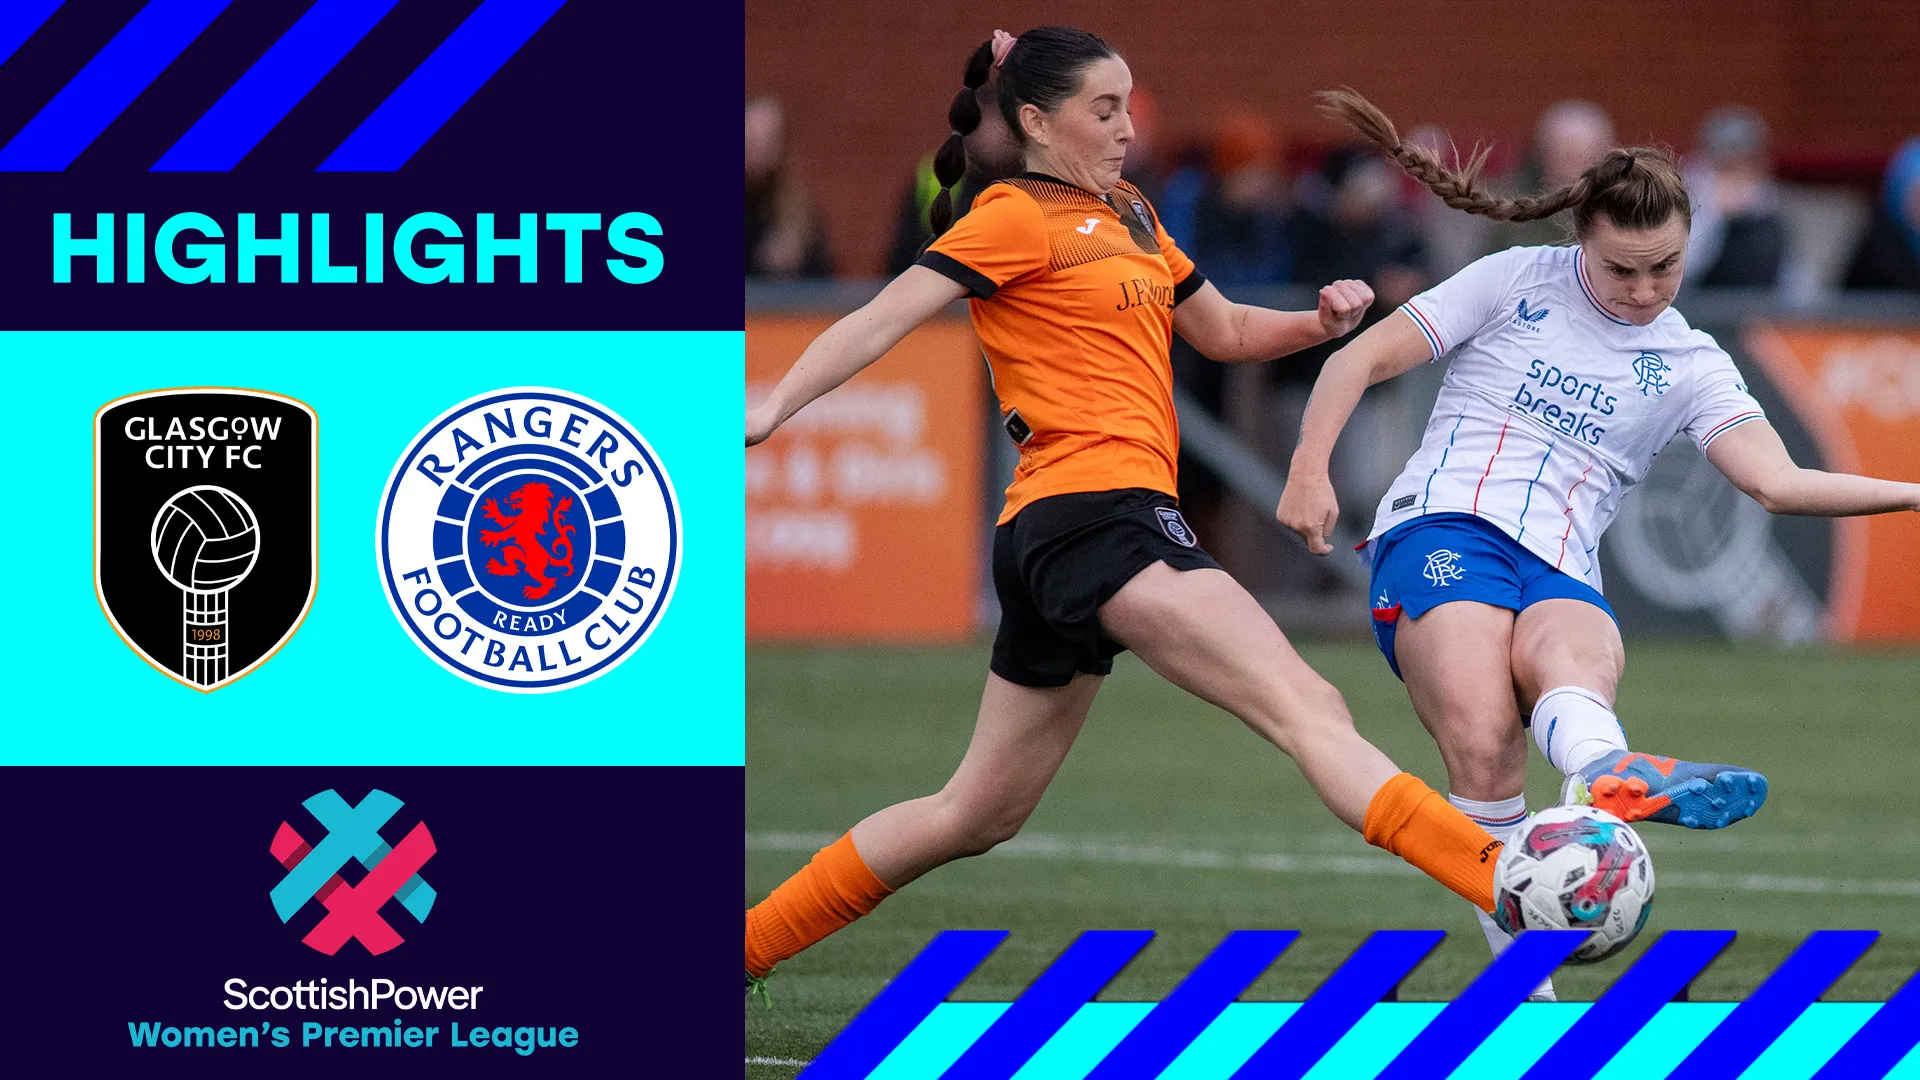 Image for Glasgow City 0-2 Rangers | Gers remain top after victory over title rivals City | SWPL